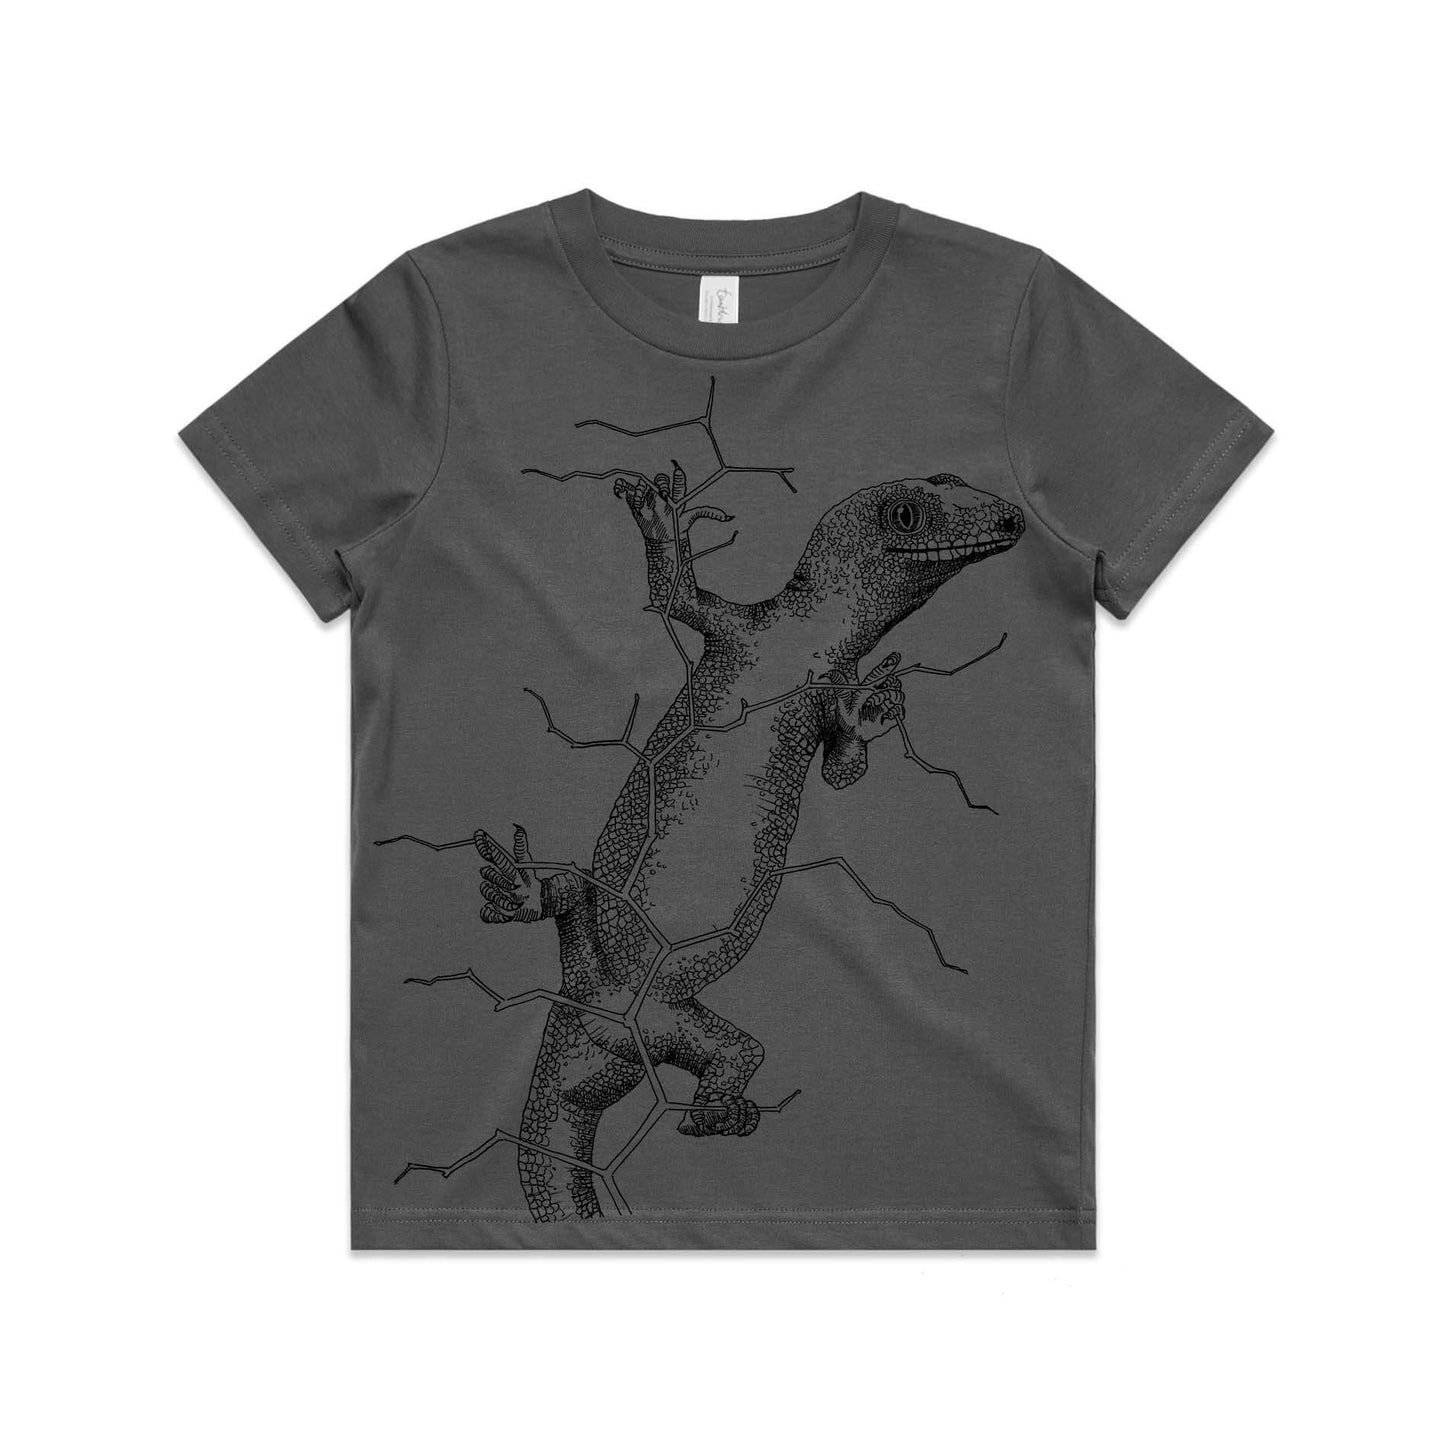 Charcoal, cotton kids' t-shirt with screen printed gecko design.